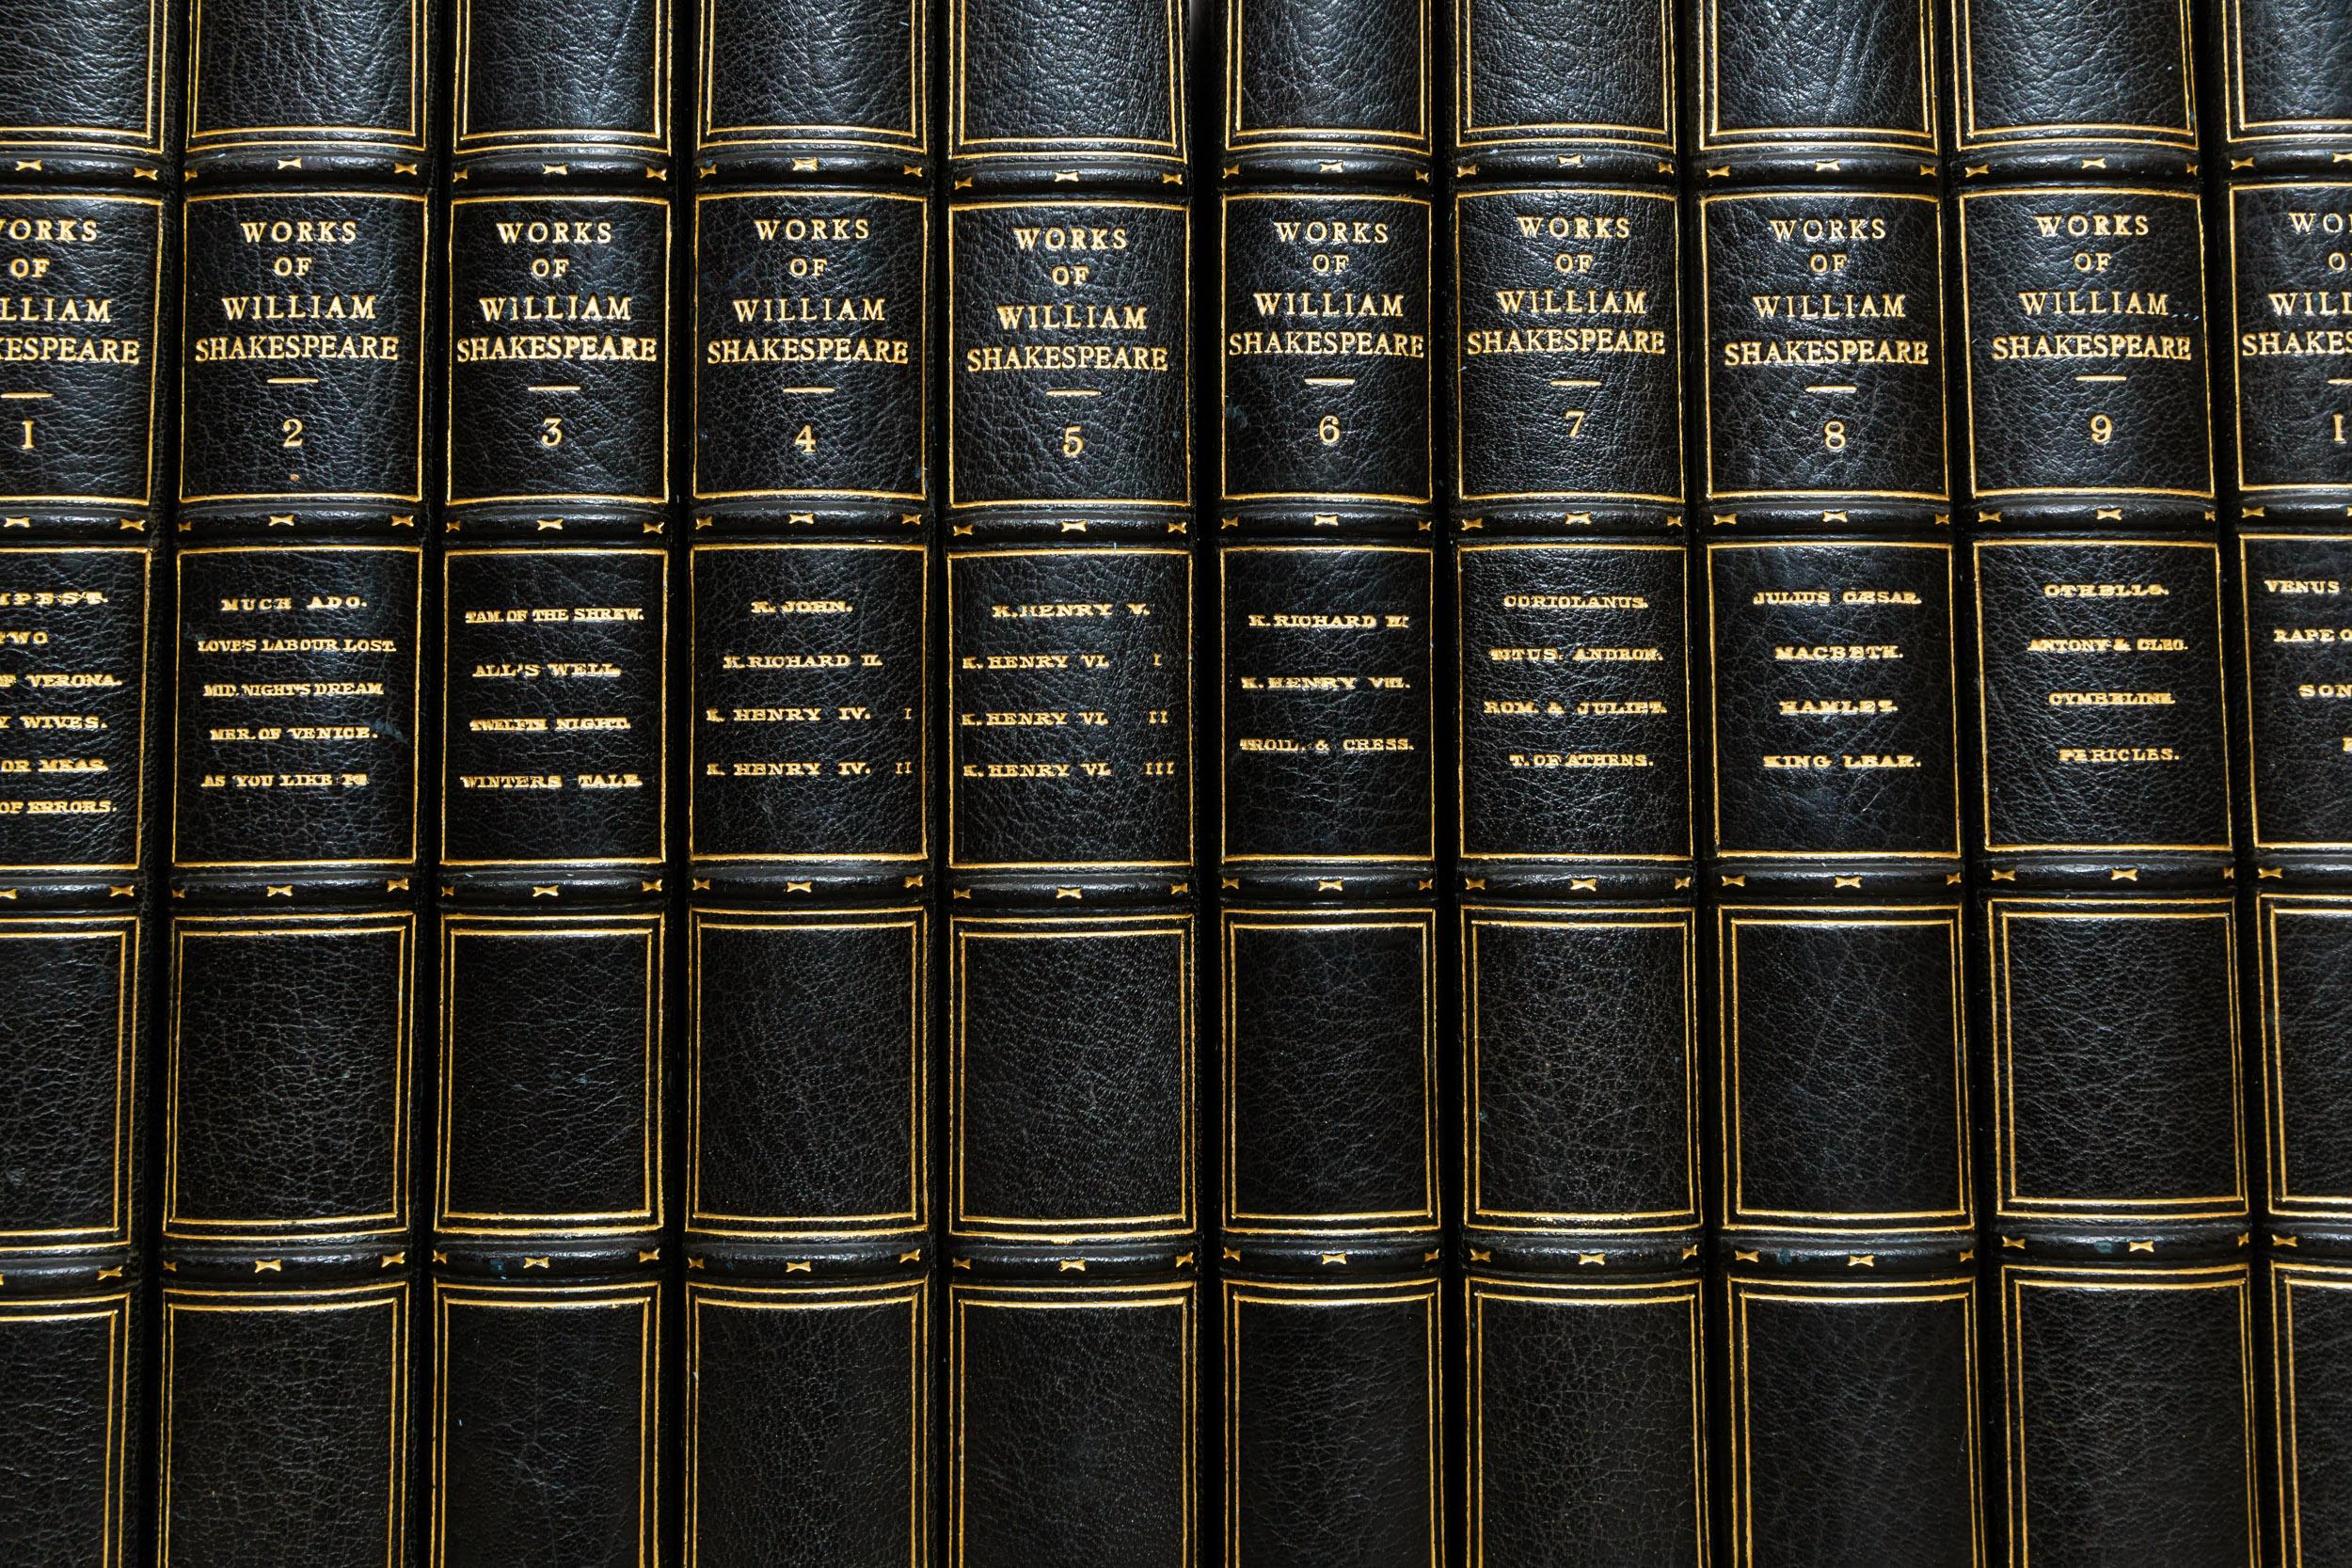 10 Volumes

Edited by W.E. Henley. Limited to 1000 copies, This is Copy #835, Signed by the Publisher.

Bound in 3/4 Blue Morocco, Top Edges Gilt, Raised Bands, Blue Cloth Boards, Marbled Endpapers, Gilt Panels. In Cloth Slipcases

Published,